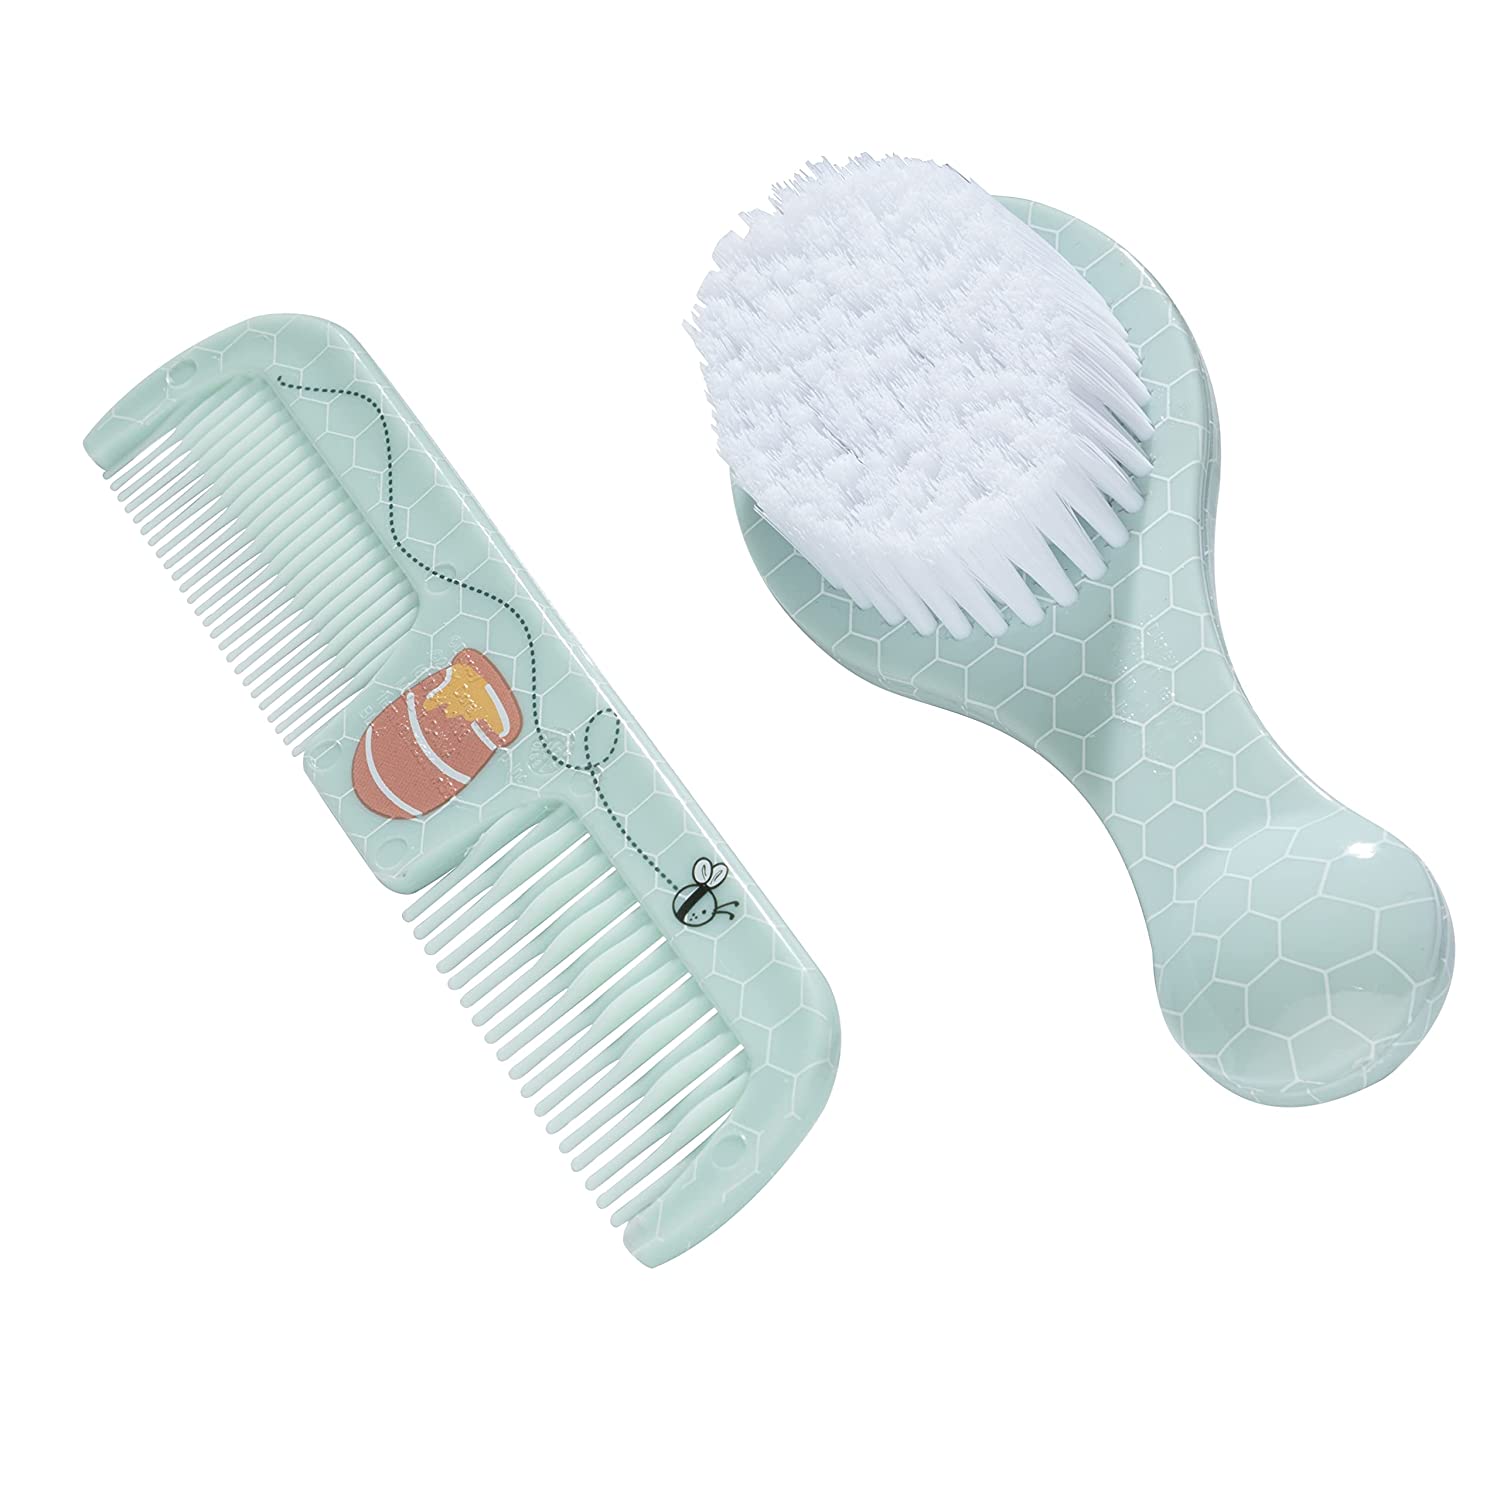 Disney Baby - Winnie The Pooh Brush & Comb Set - With Easy Grip Handles